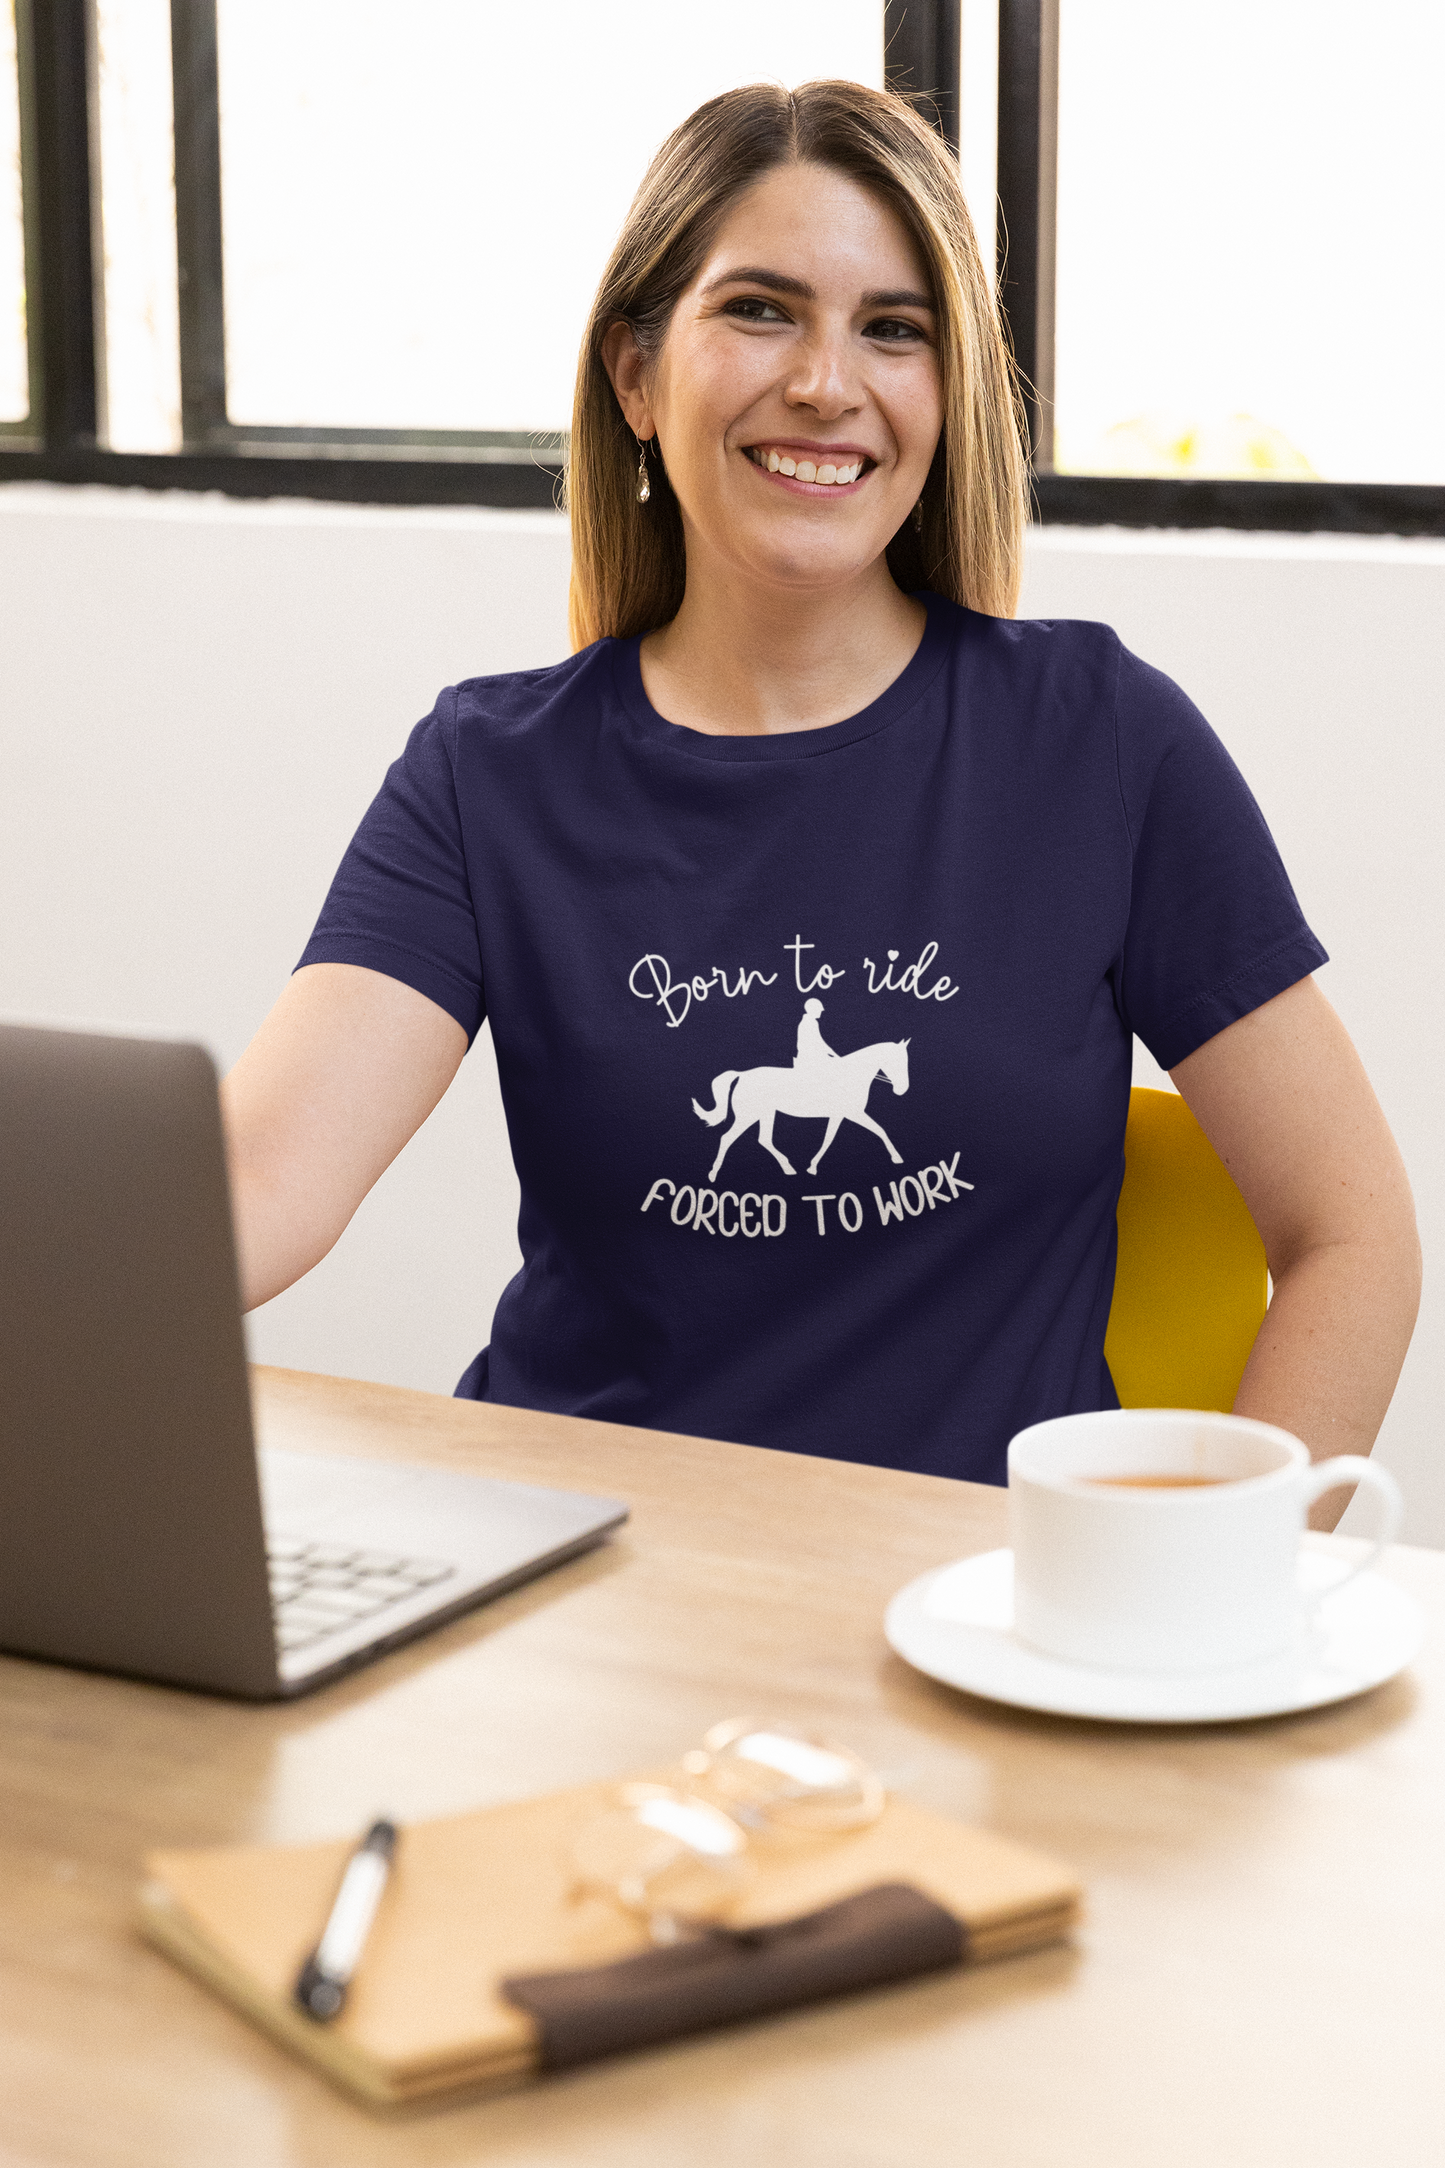 Born to Ride, Forced to Work Horse Tee